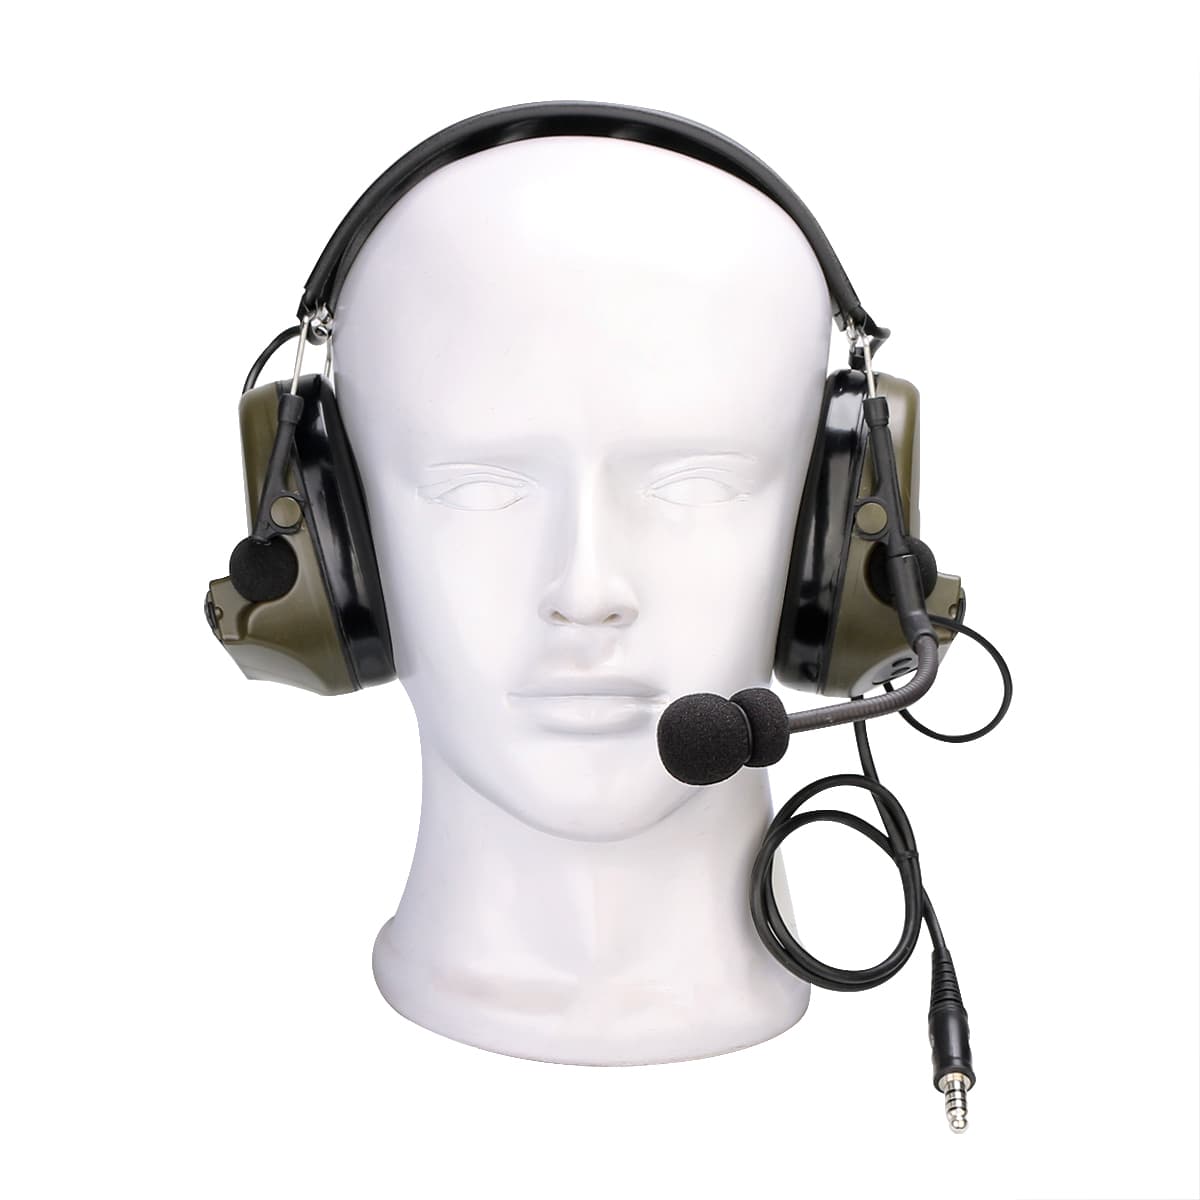 Retevis EHK007 Tactical Electronic Hearing Protector Headset